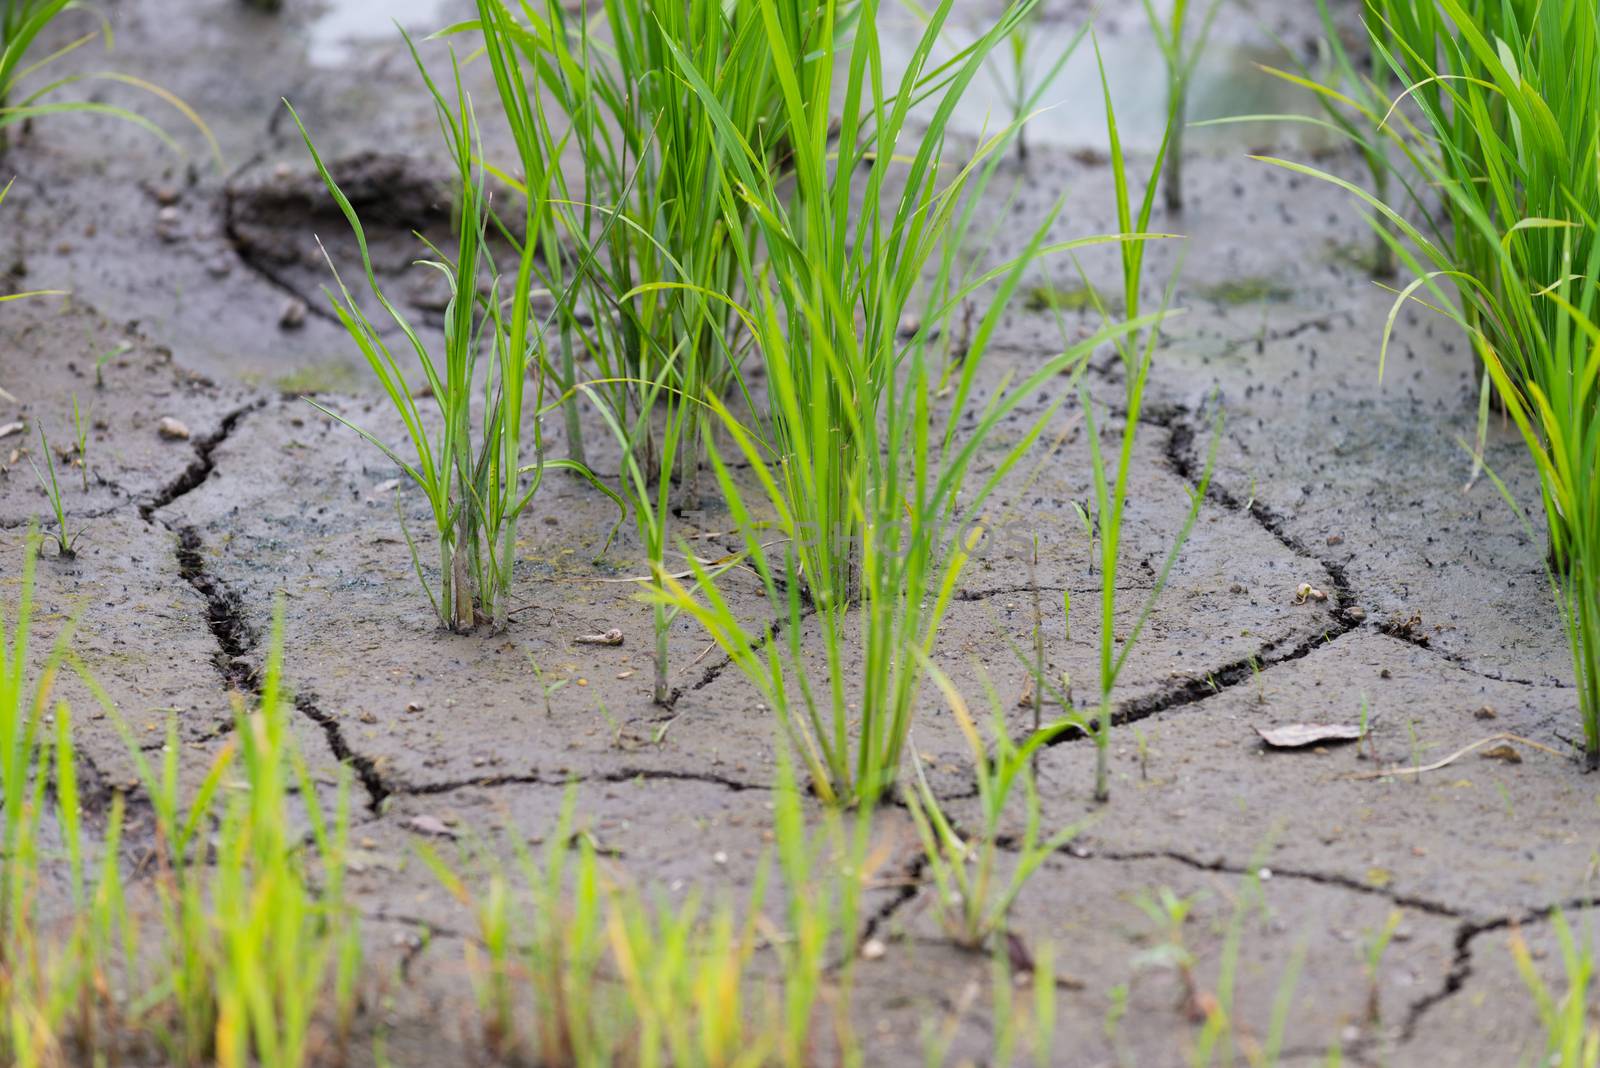 Rice Plant in Cracked Mud by justtscott